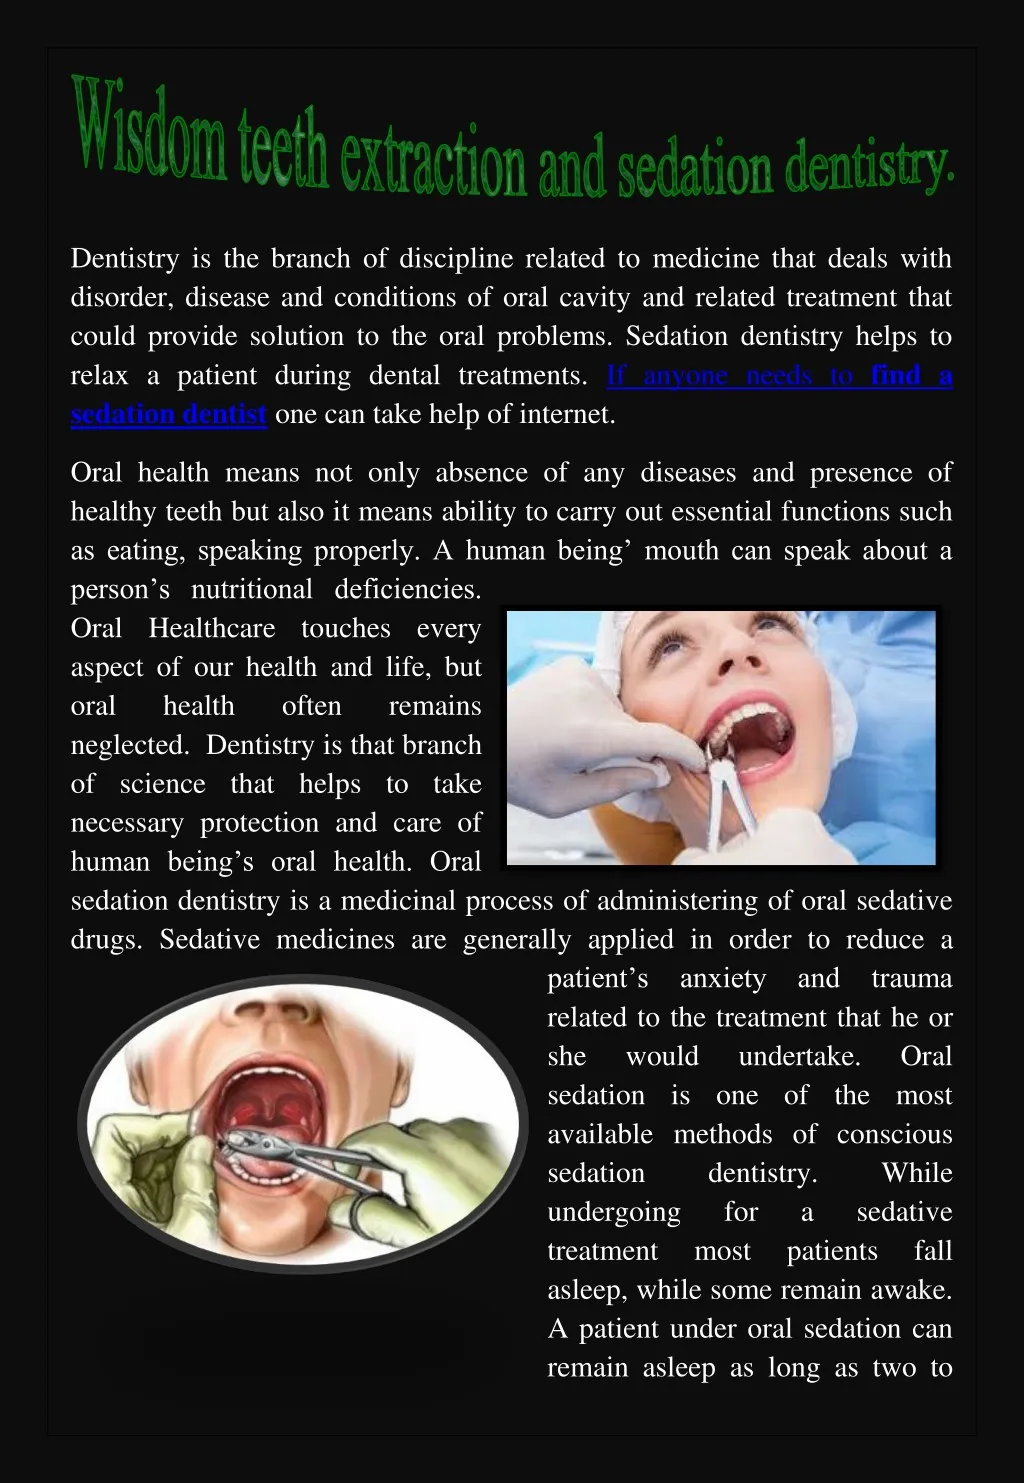 dentistry is the branch of discipline related